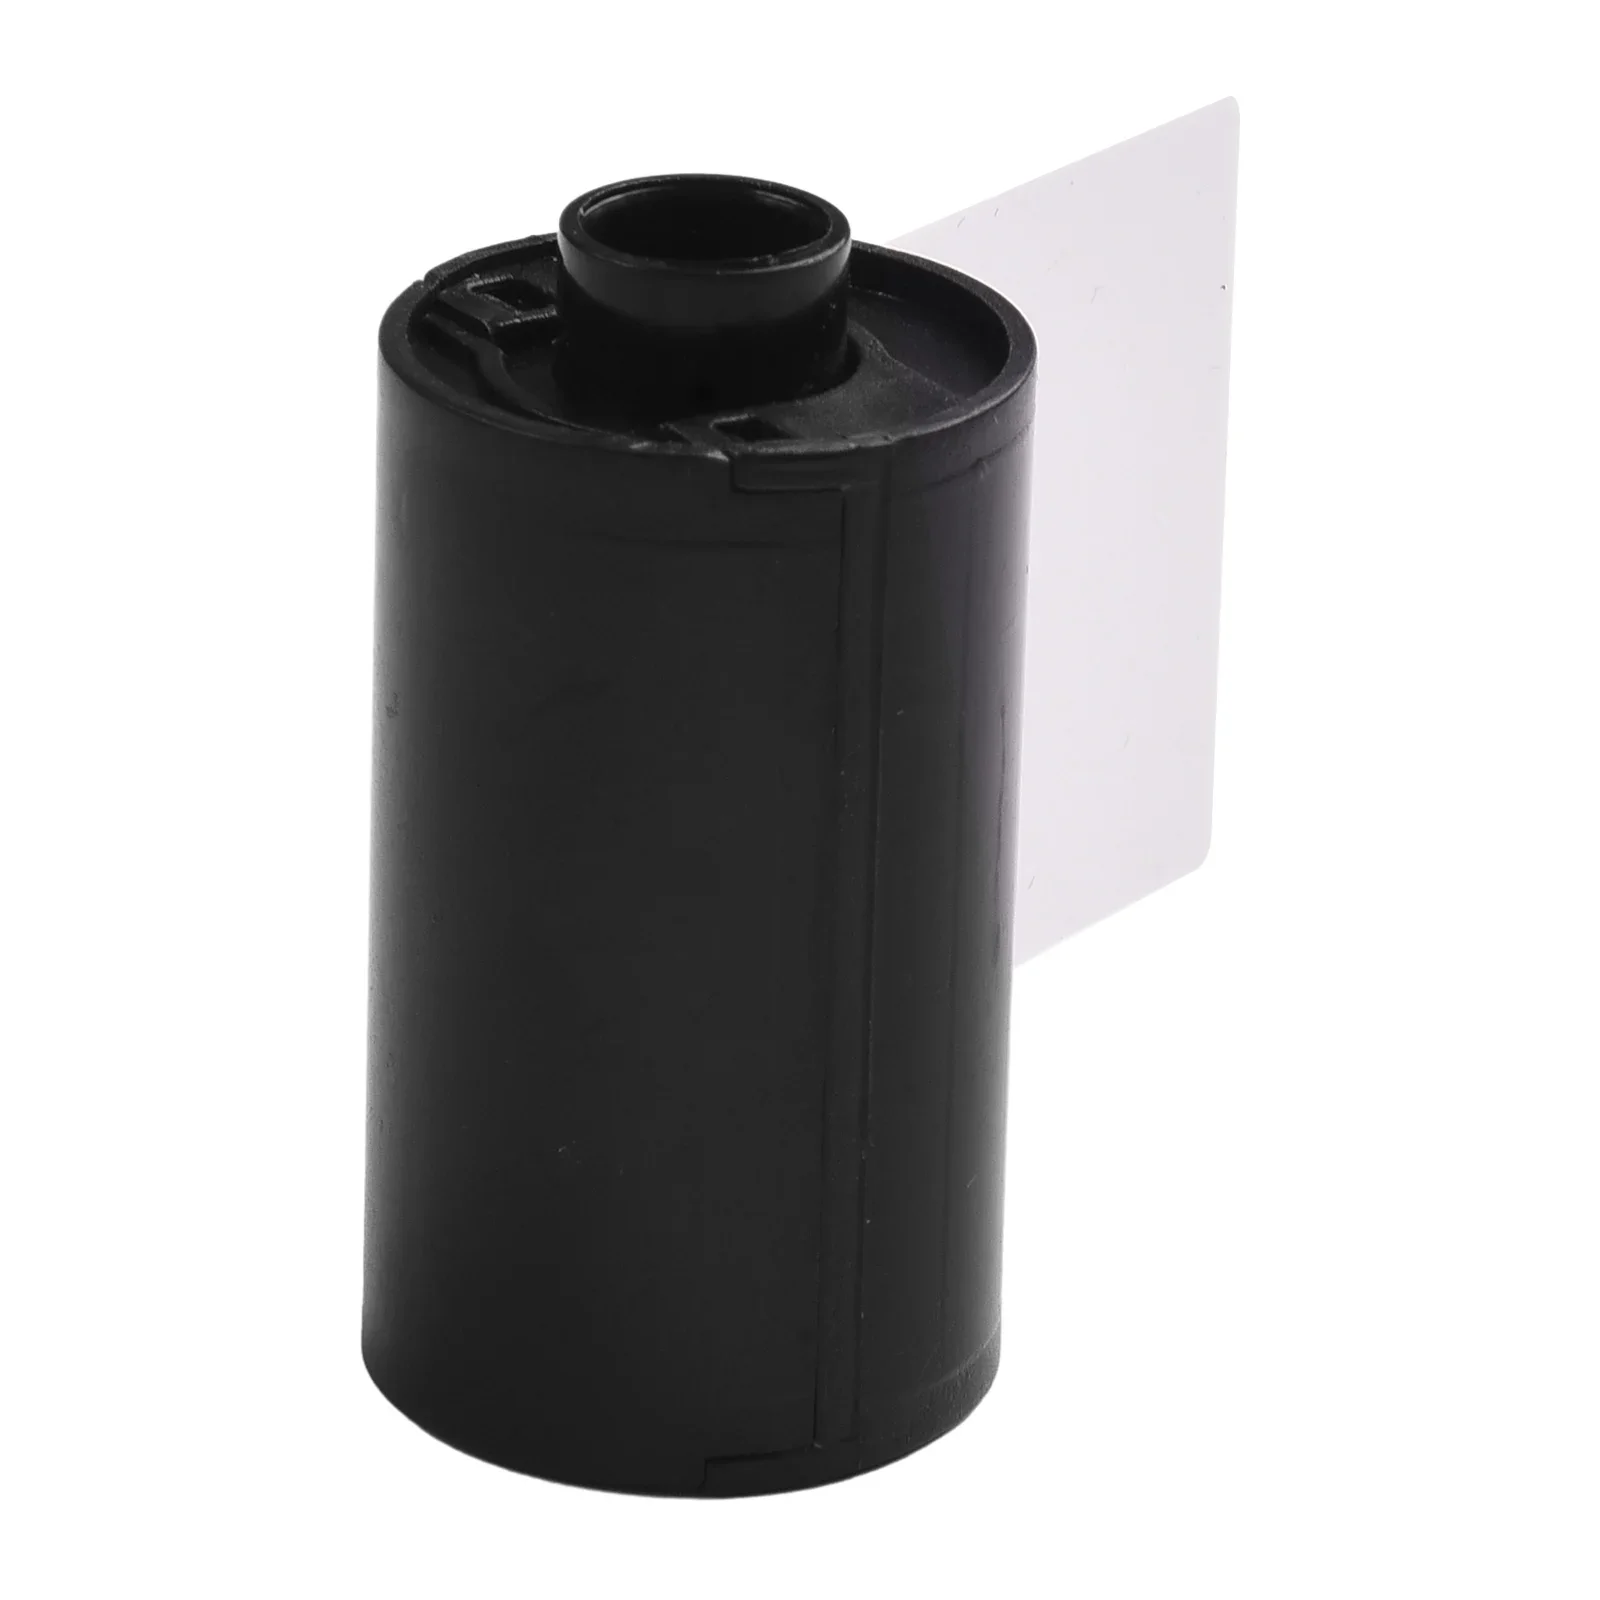 For 135/35MM Empty Film Cartridge Case For Repacking 35mm Empty Film Cartridge Canisters For Bulk Loading